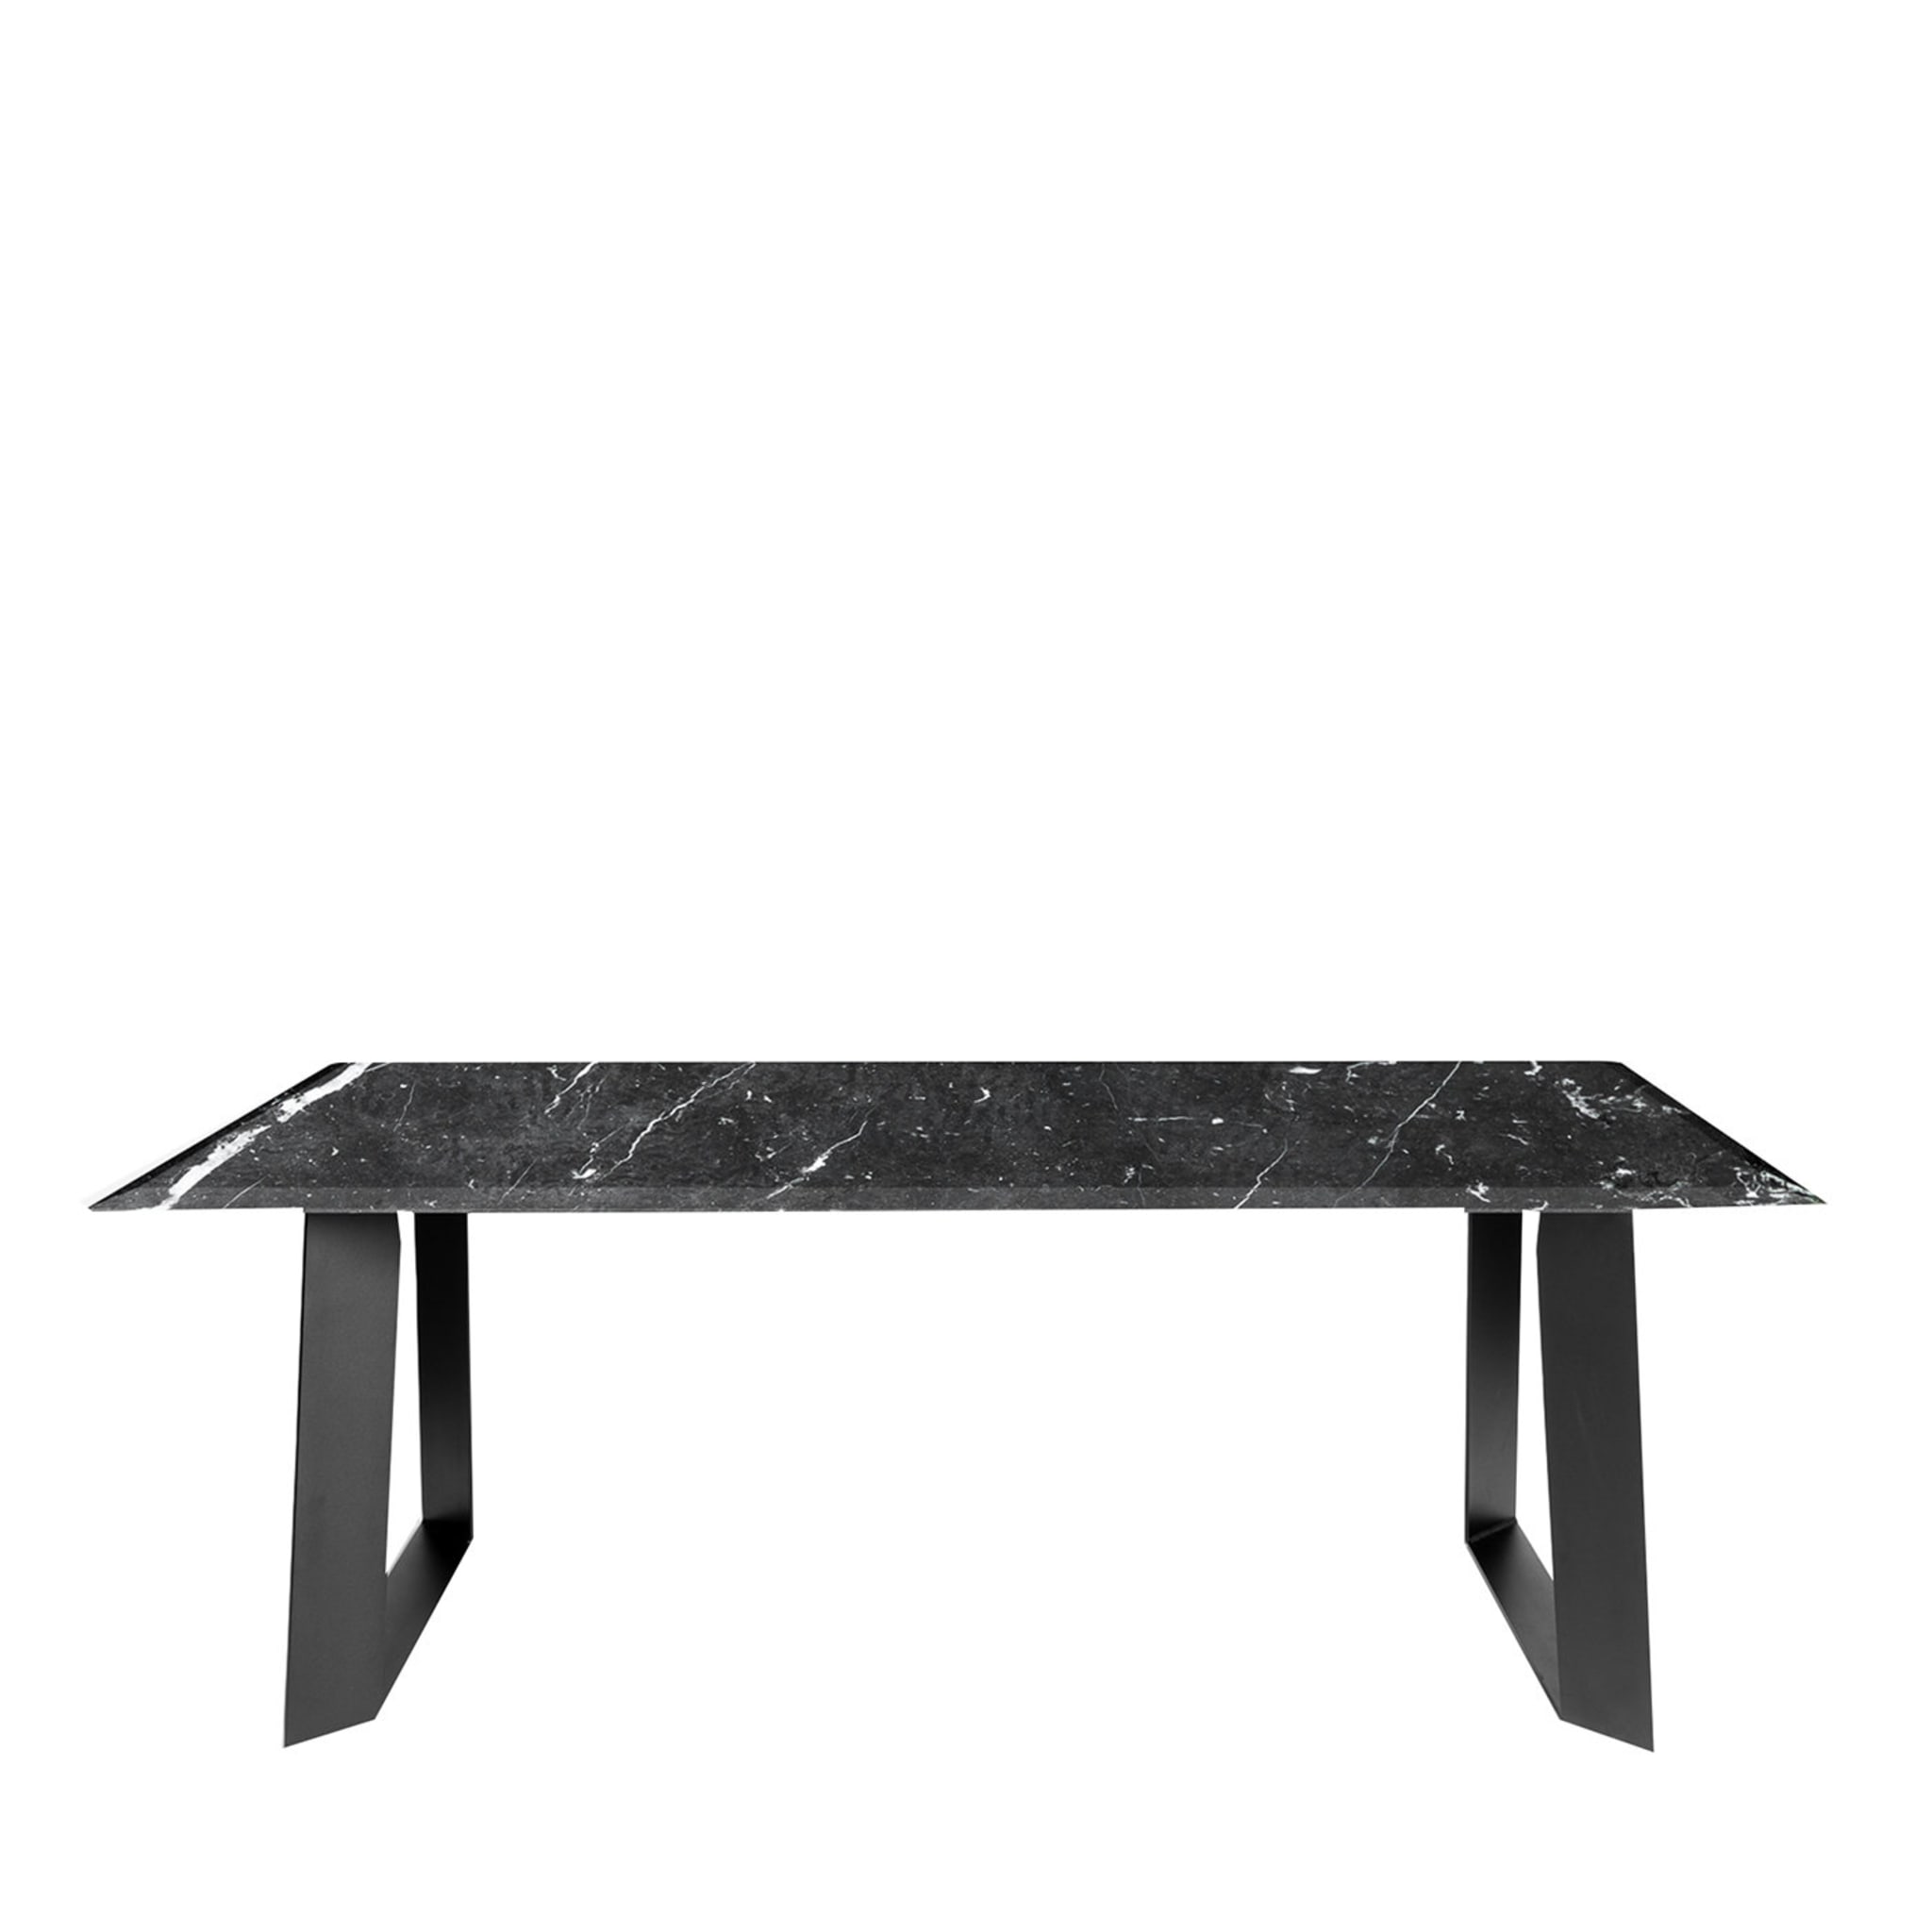 Domino Black Marquinia Dining Table - Main view